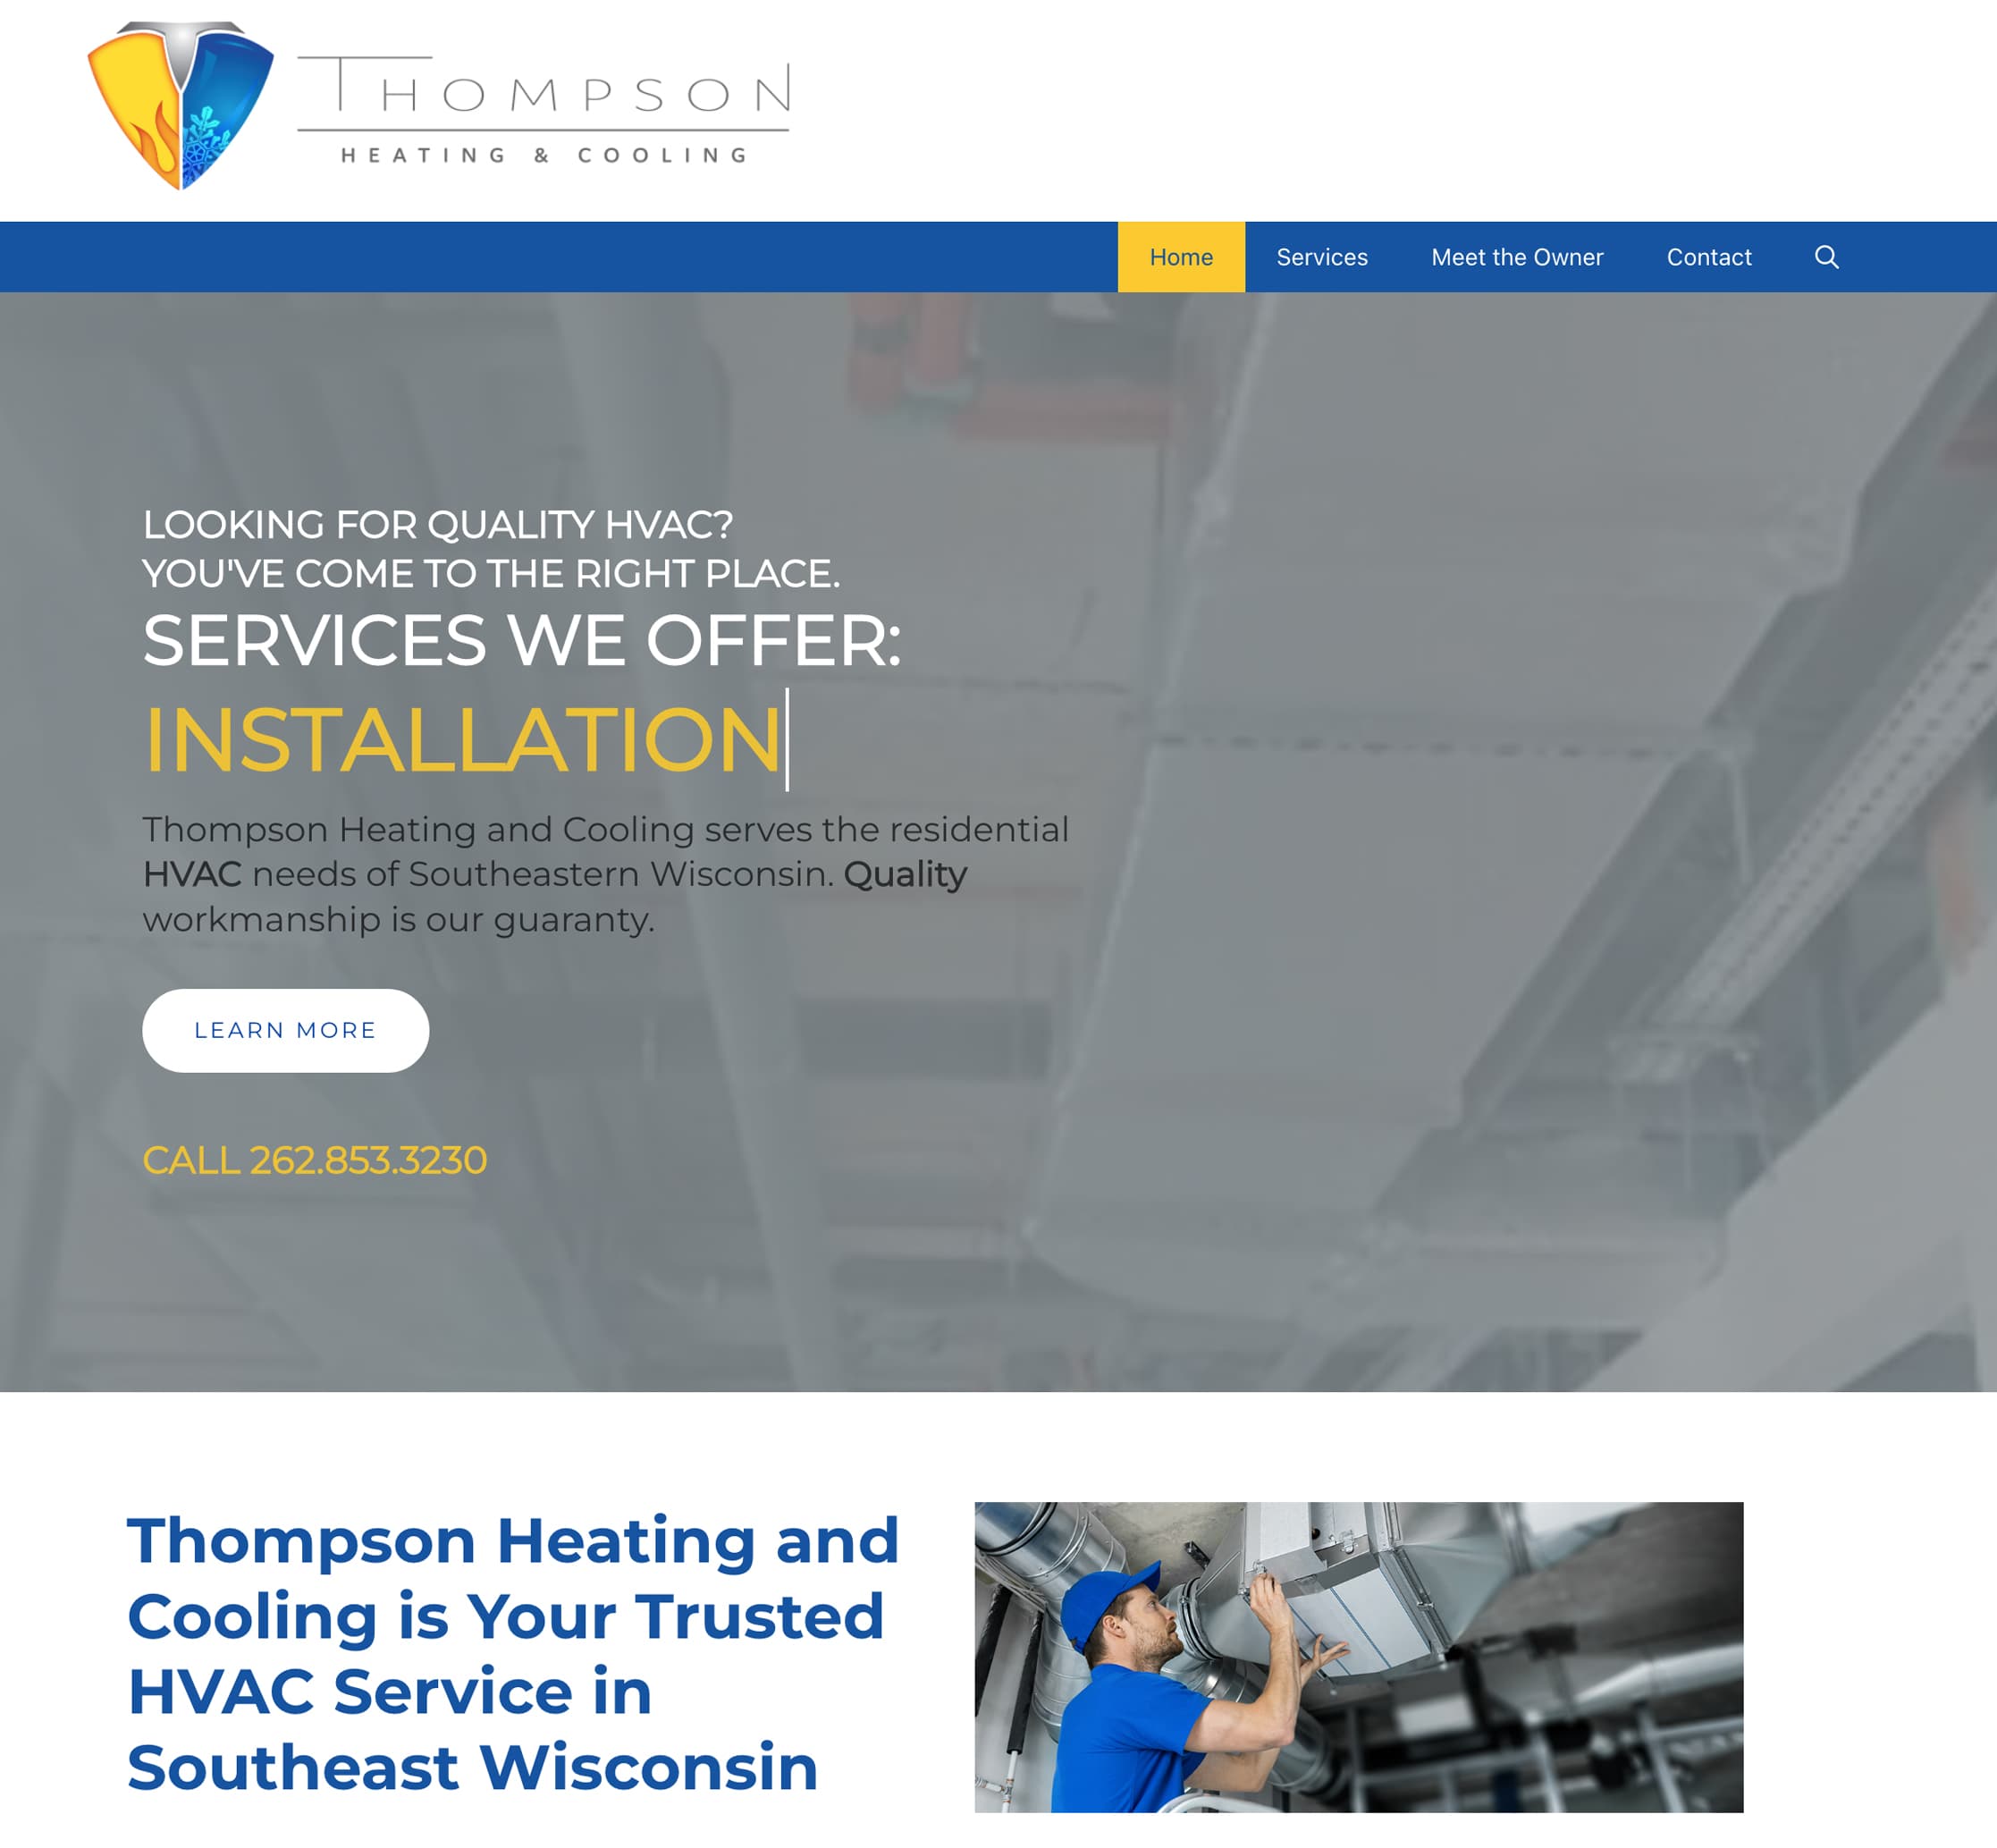 Thompson Heating and Cooling